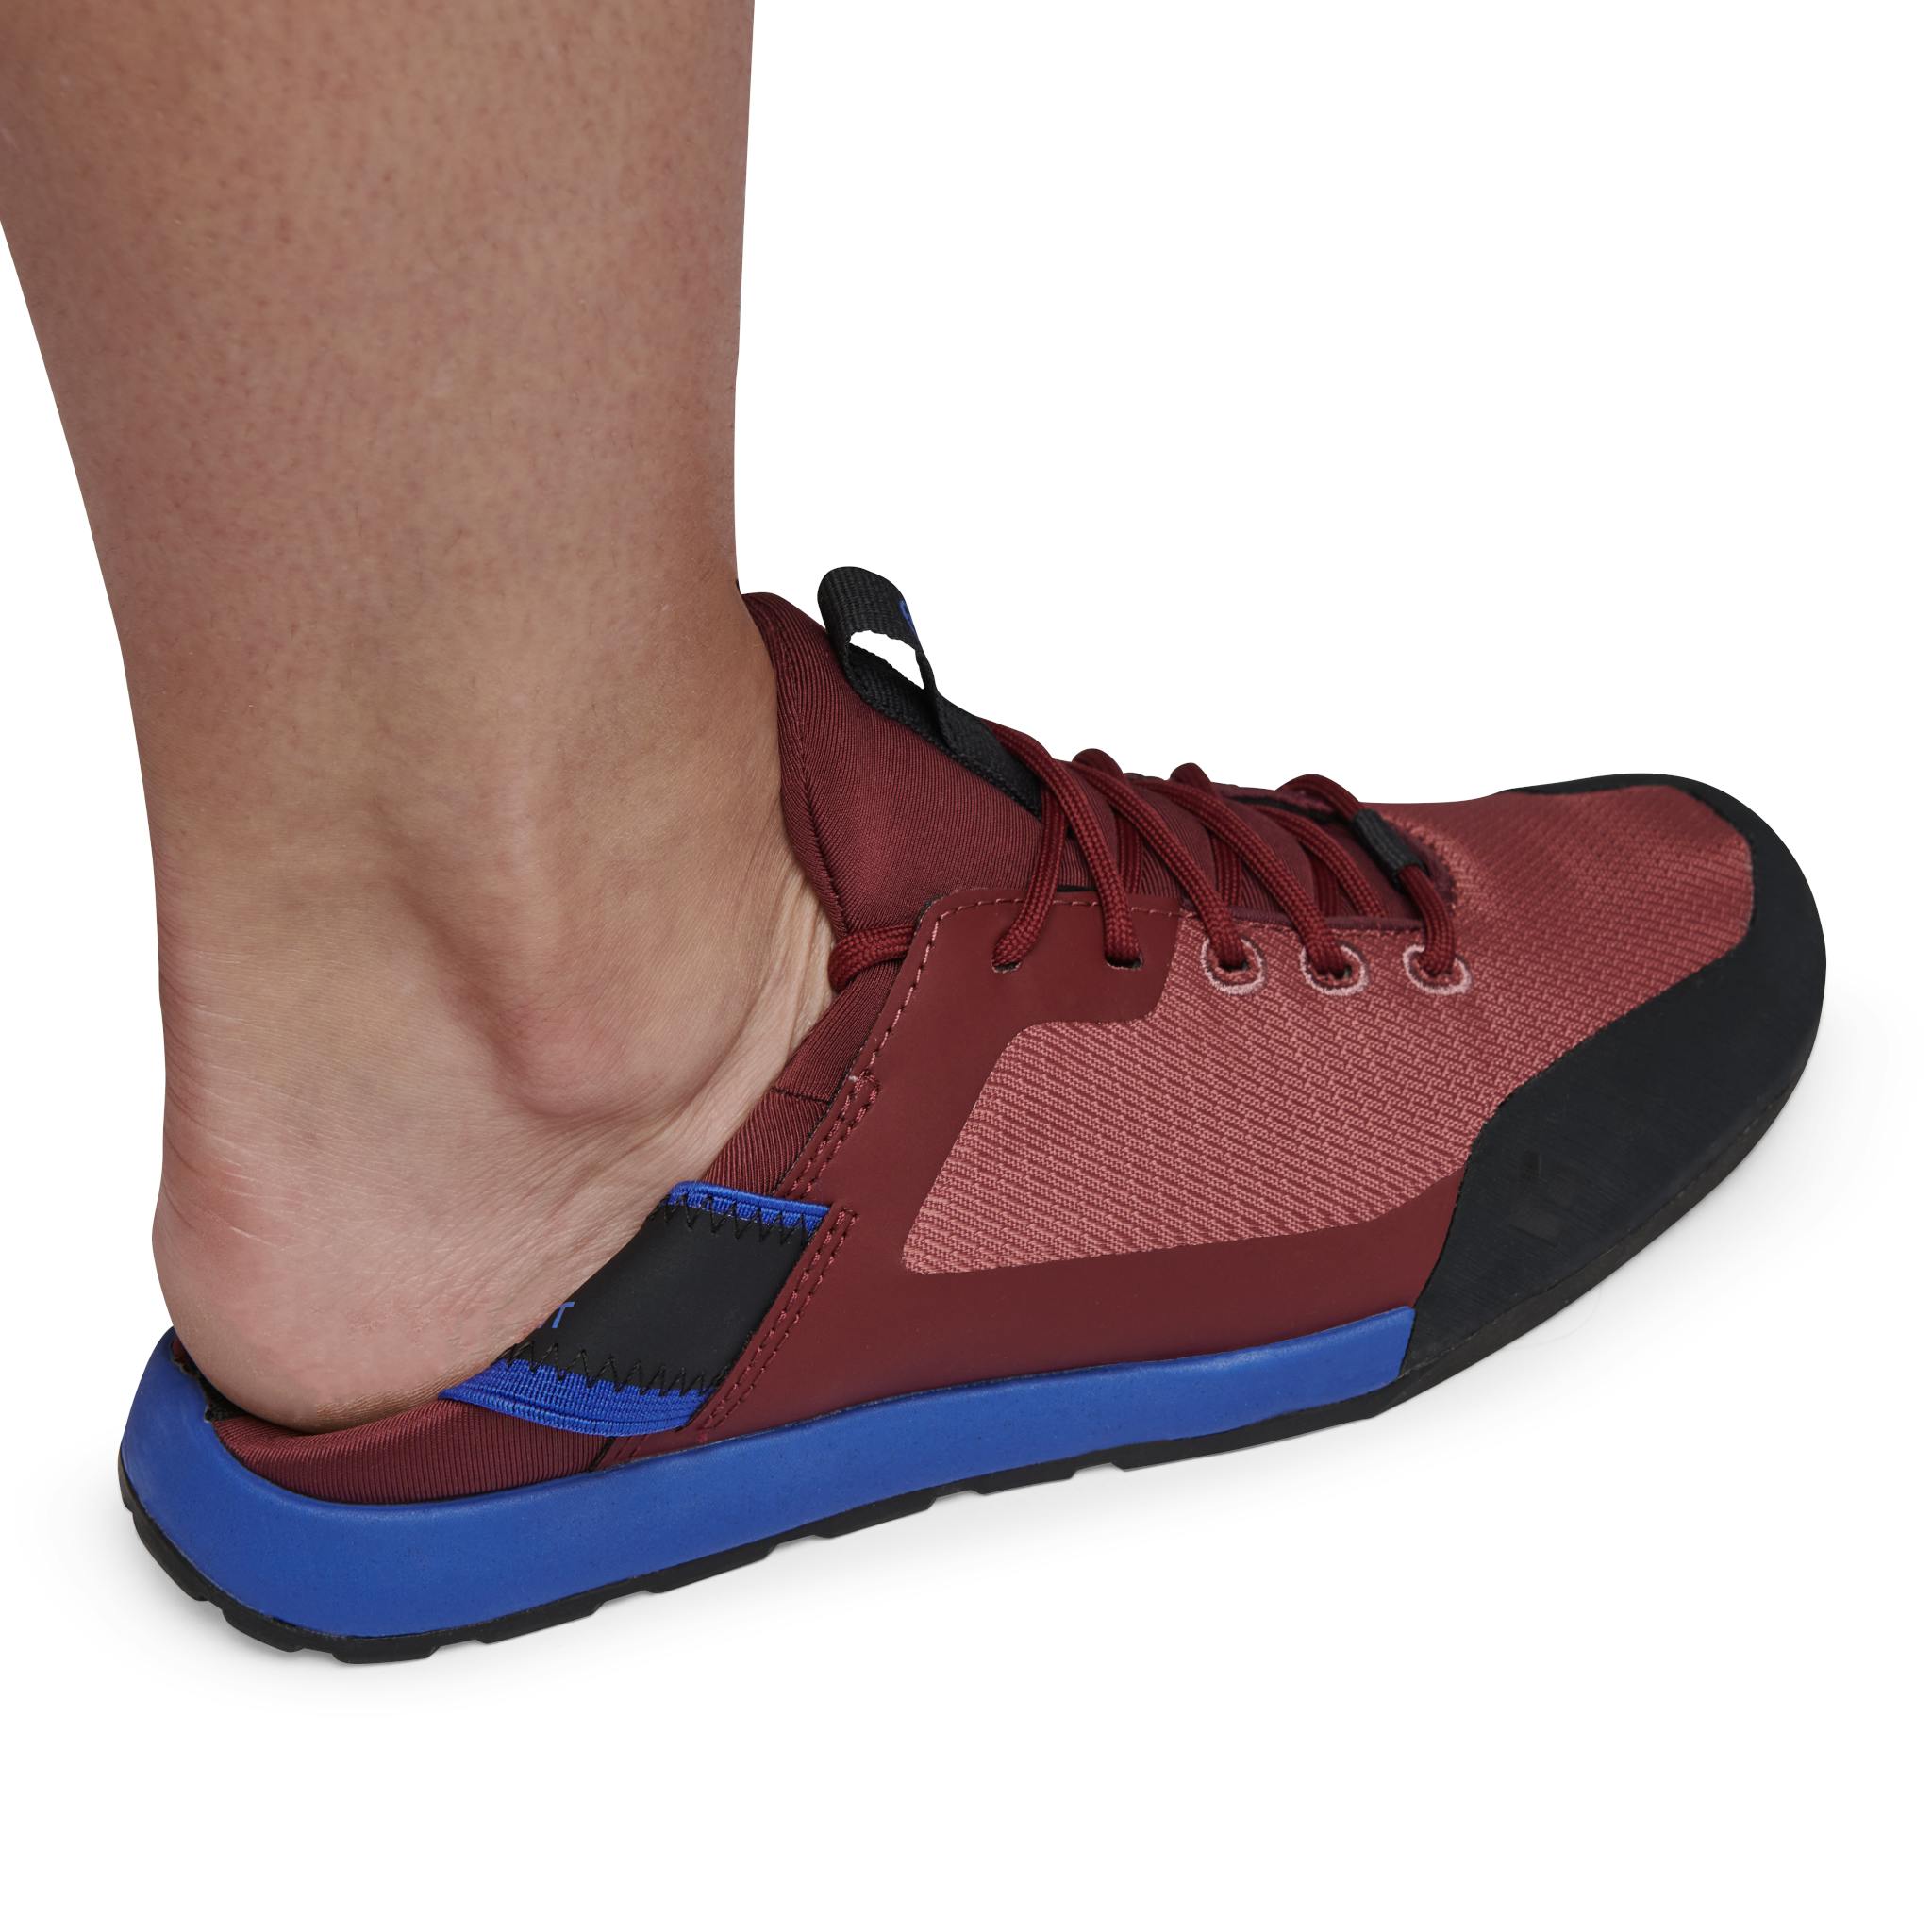 Stretch-fit heel and elastic heel strap for easy on/off at the gym or crag